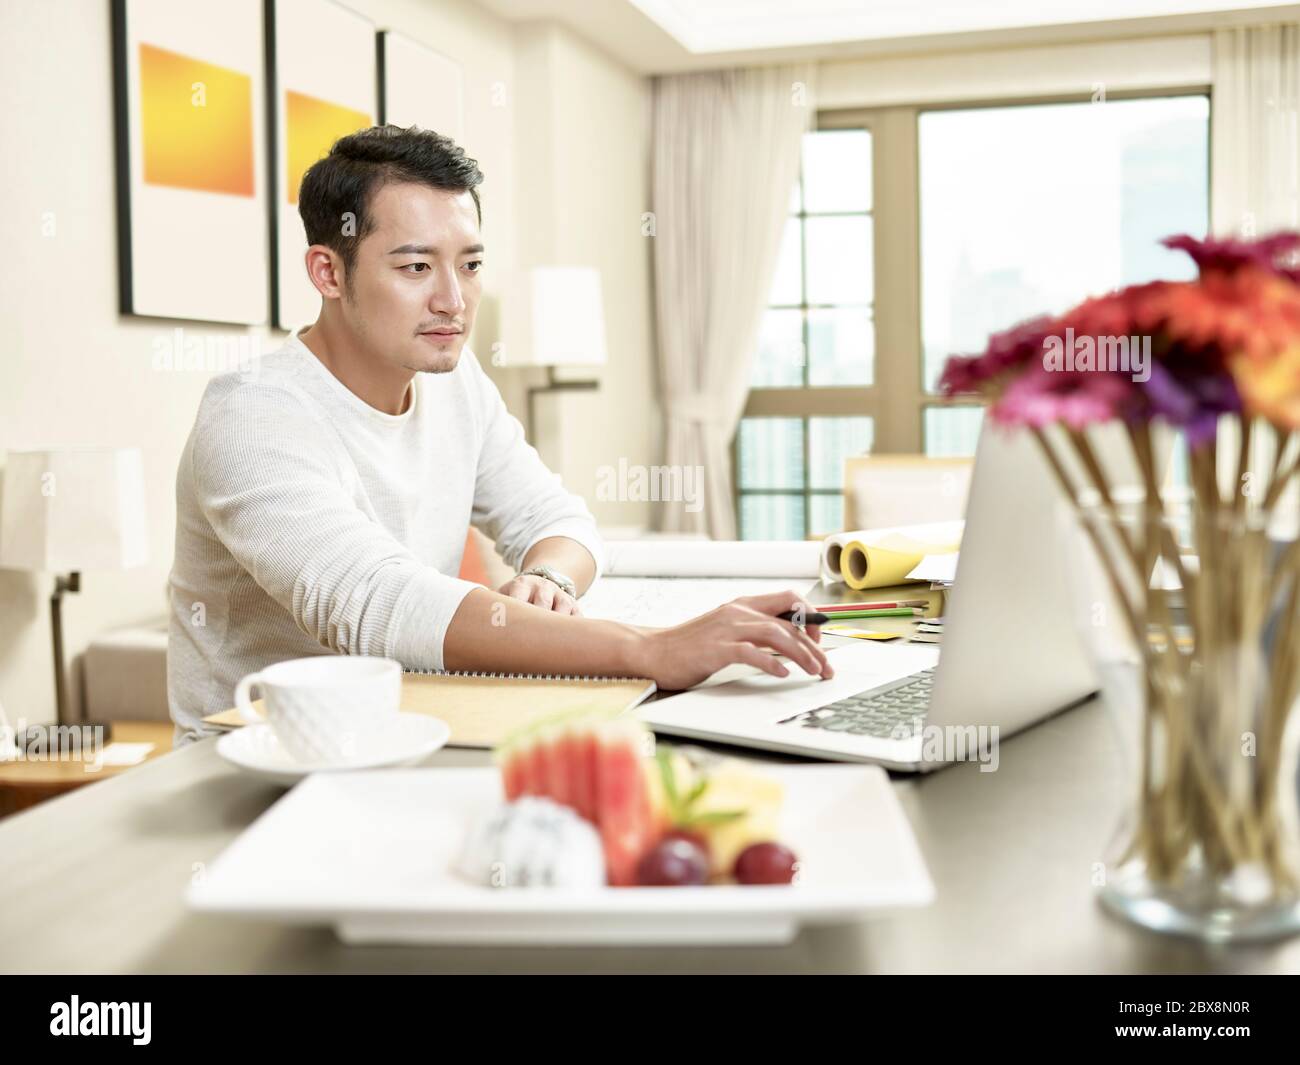 young asian business man working from home sitting at kitchen counter looking at laptop computer (artwork in background digitally altered) Stock Photo